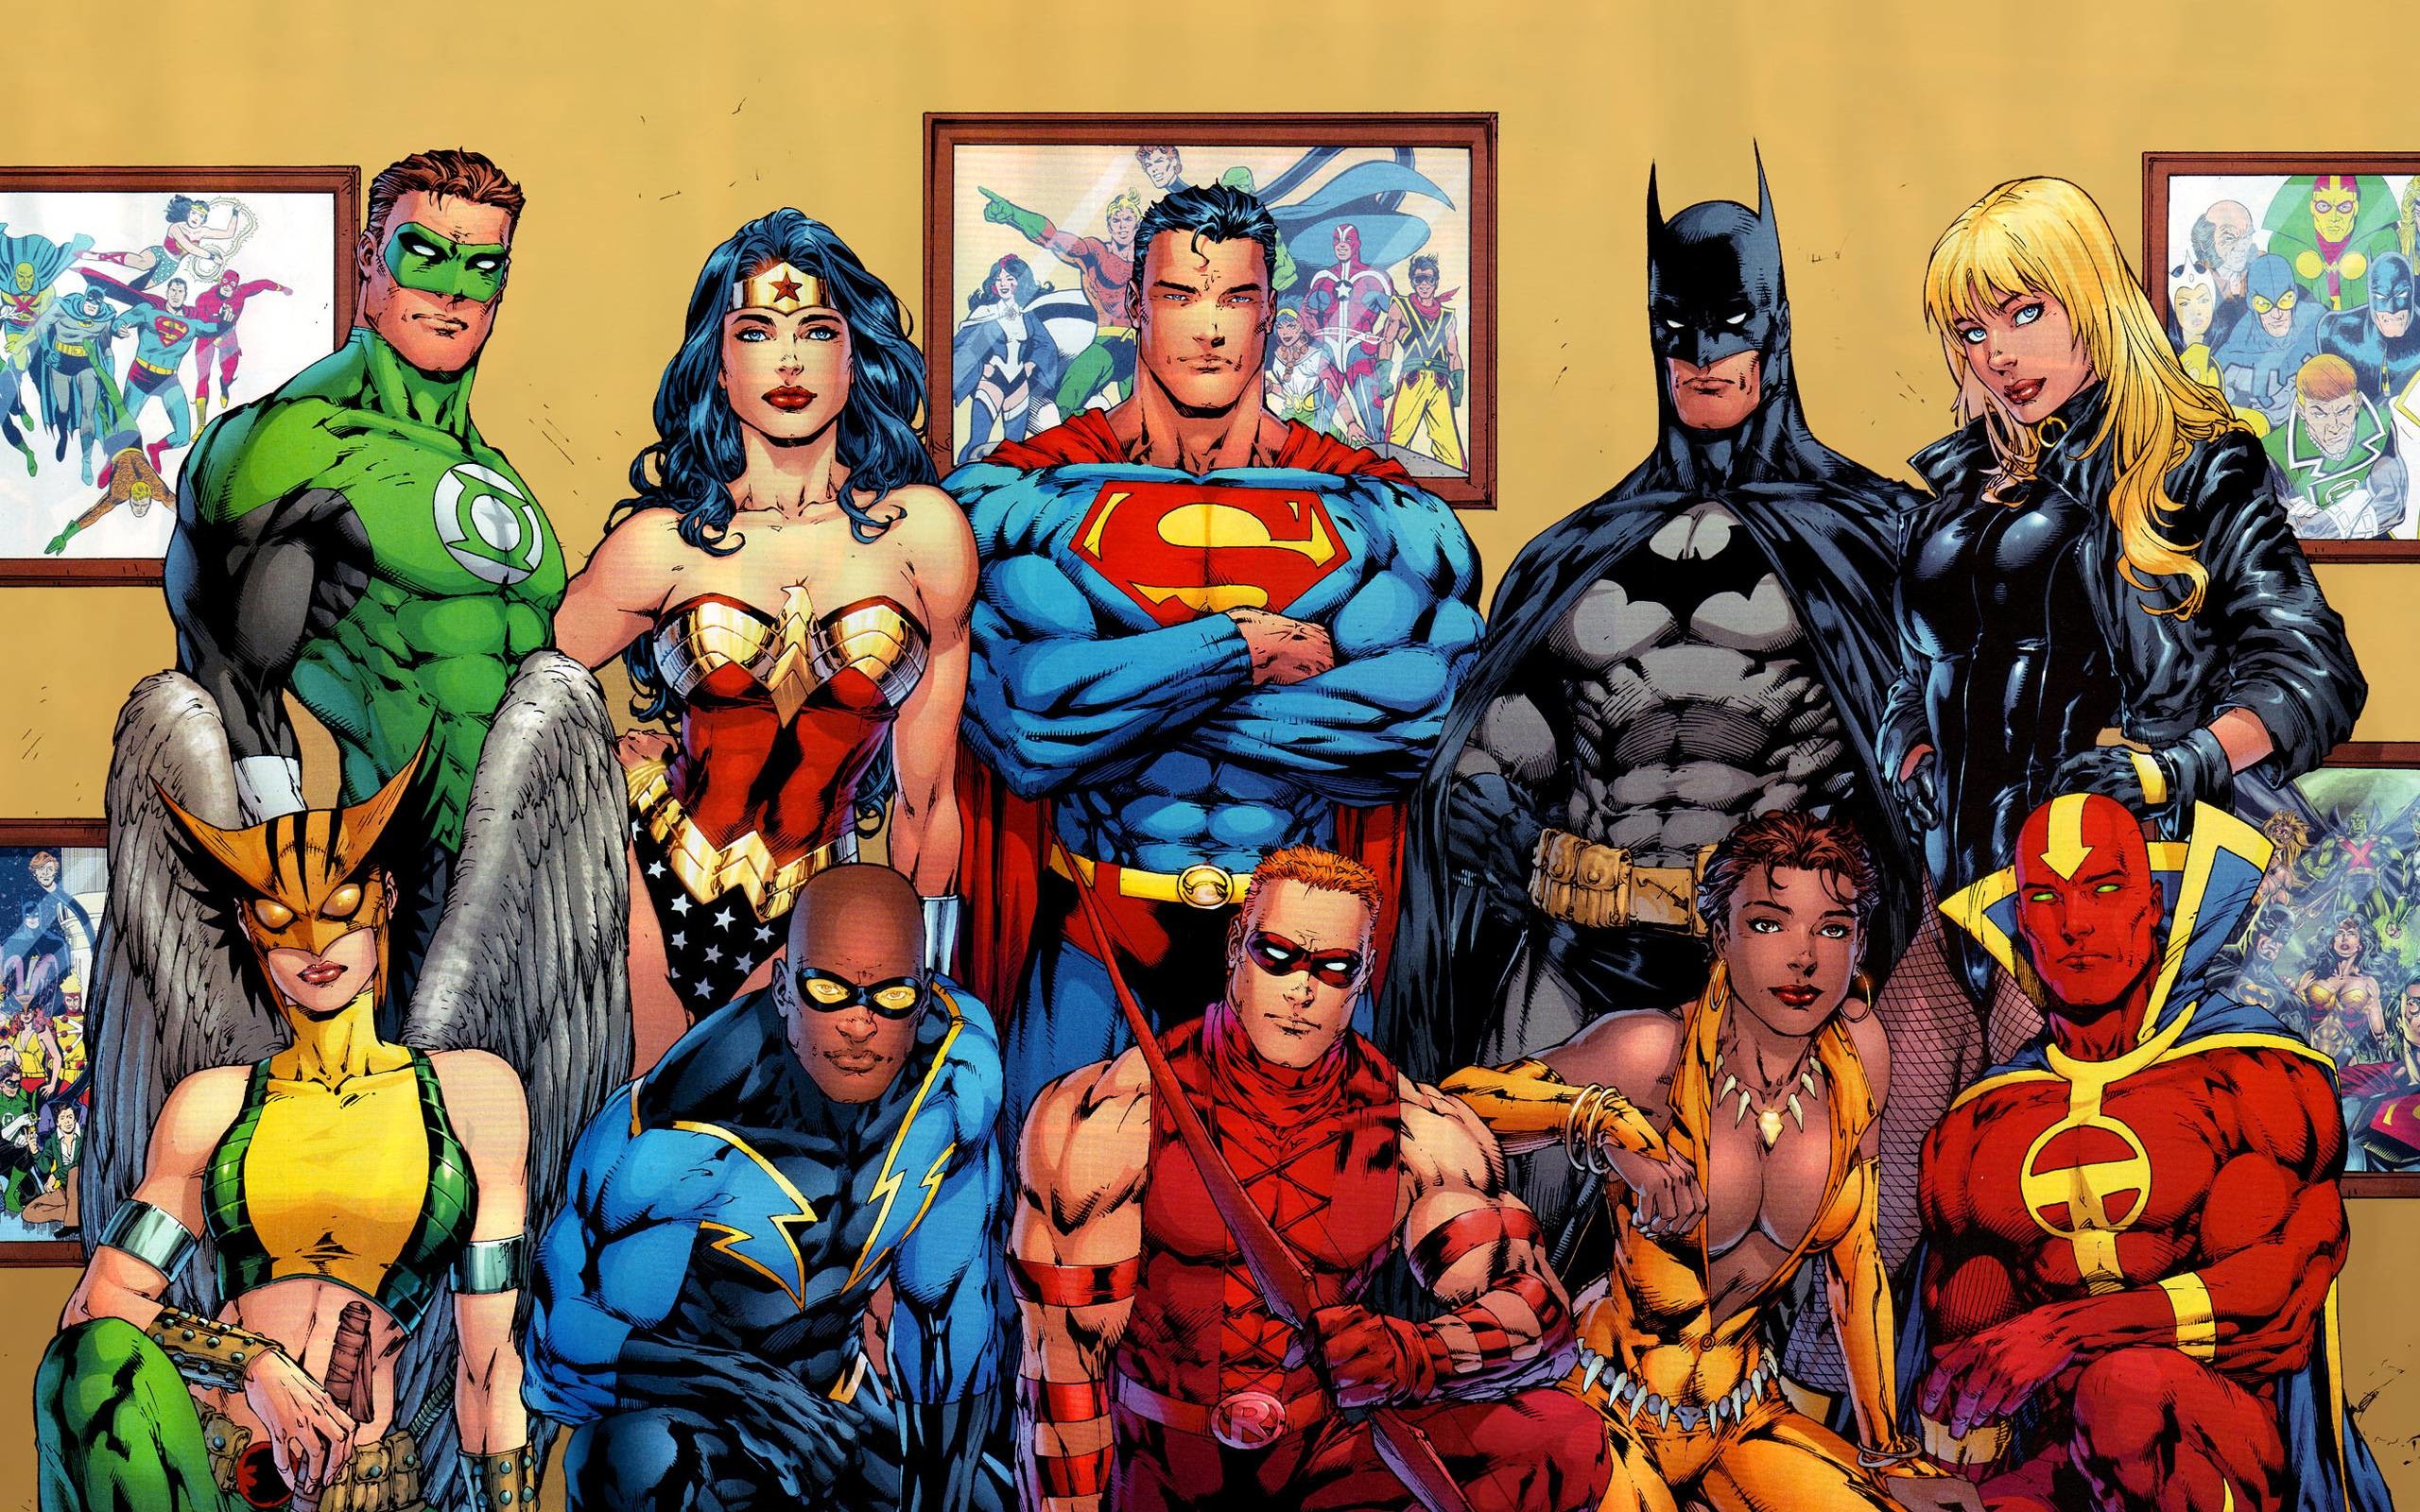 2560x1600 ... Batman, Wonder Woman, Green Lantern, Flash and Green Arrow to mention a  few. Amazing art work by Alex Ross and some by the late Michael Turner.